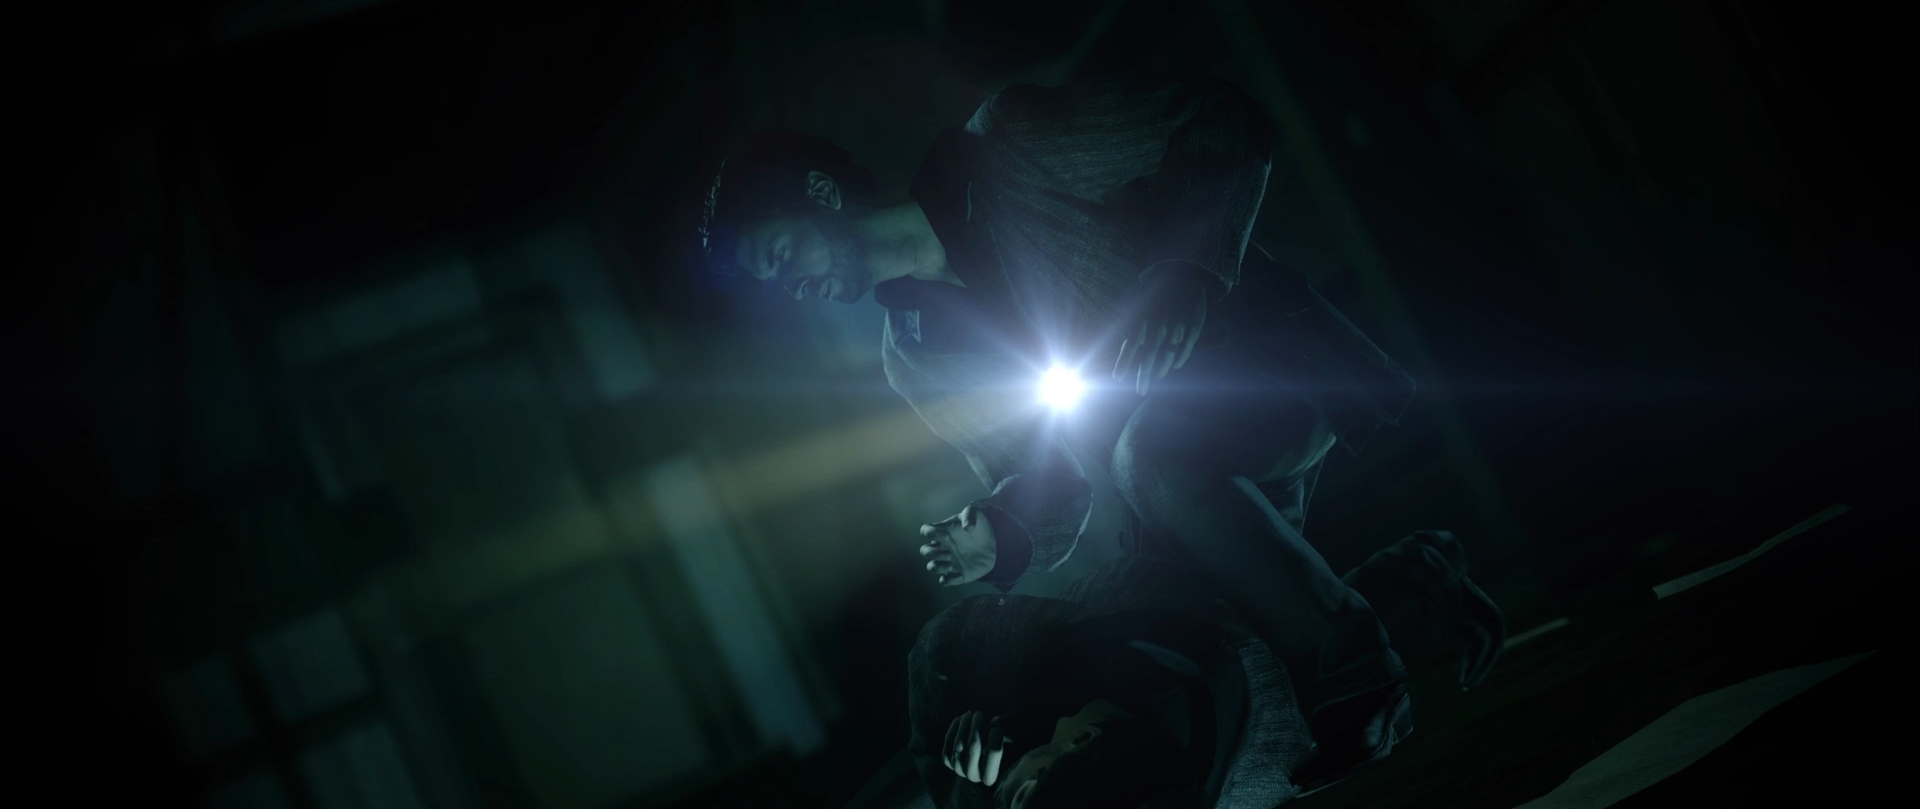 Alan Wake 2 is Set to Launch in October, According to Voice Actor